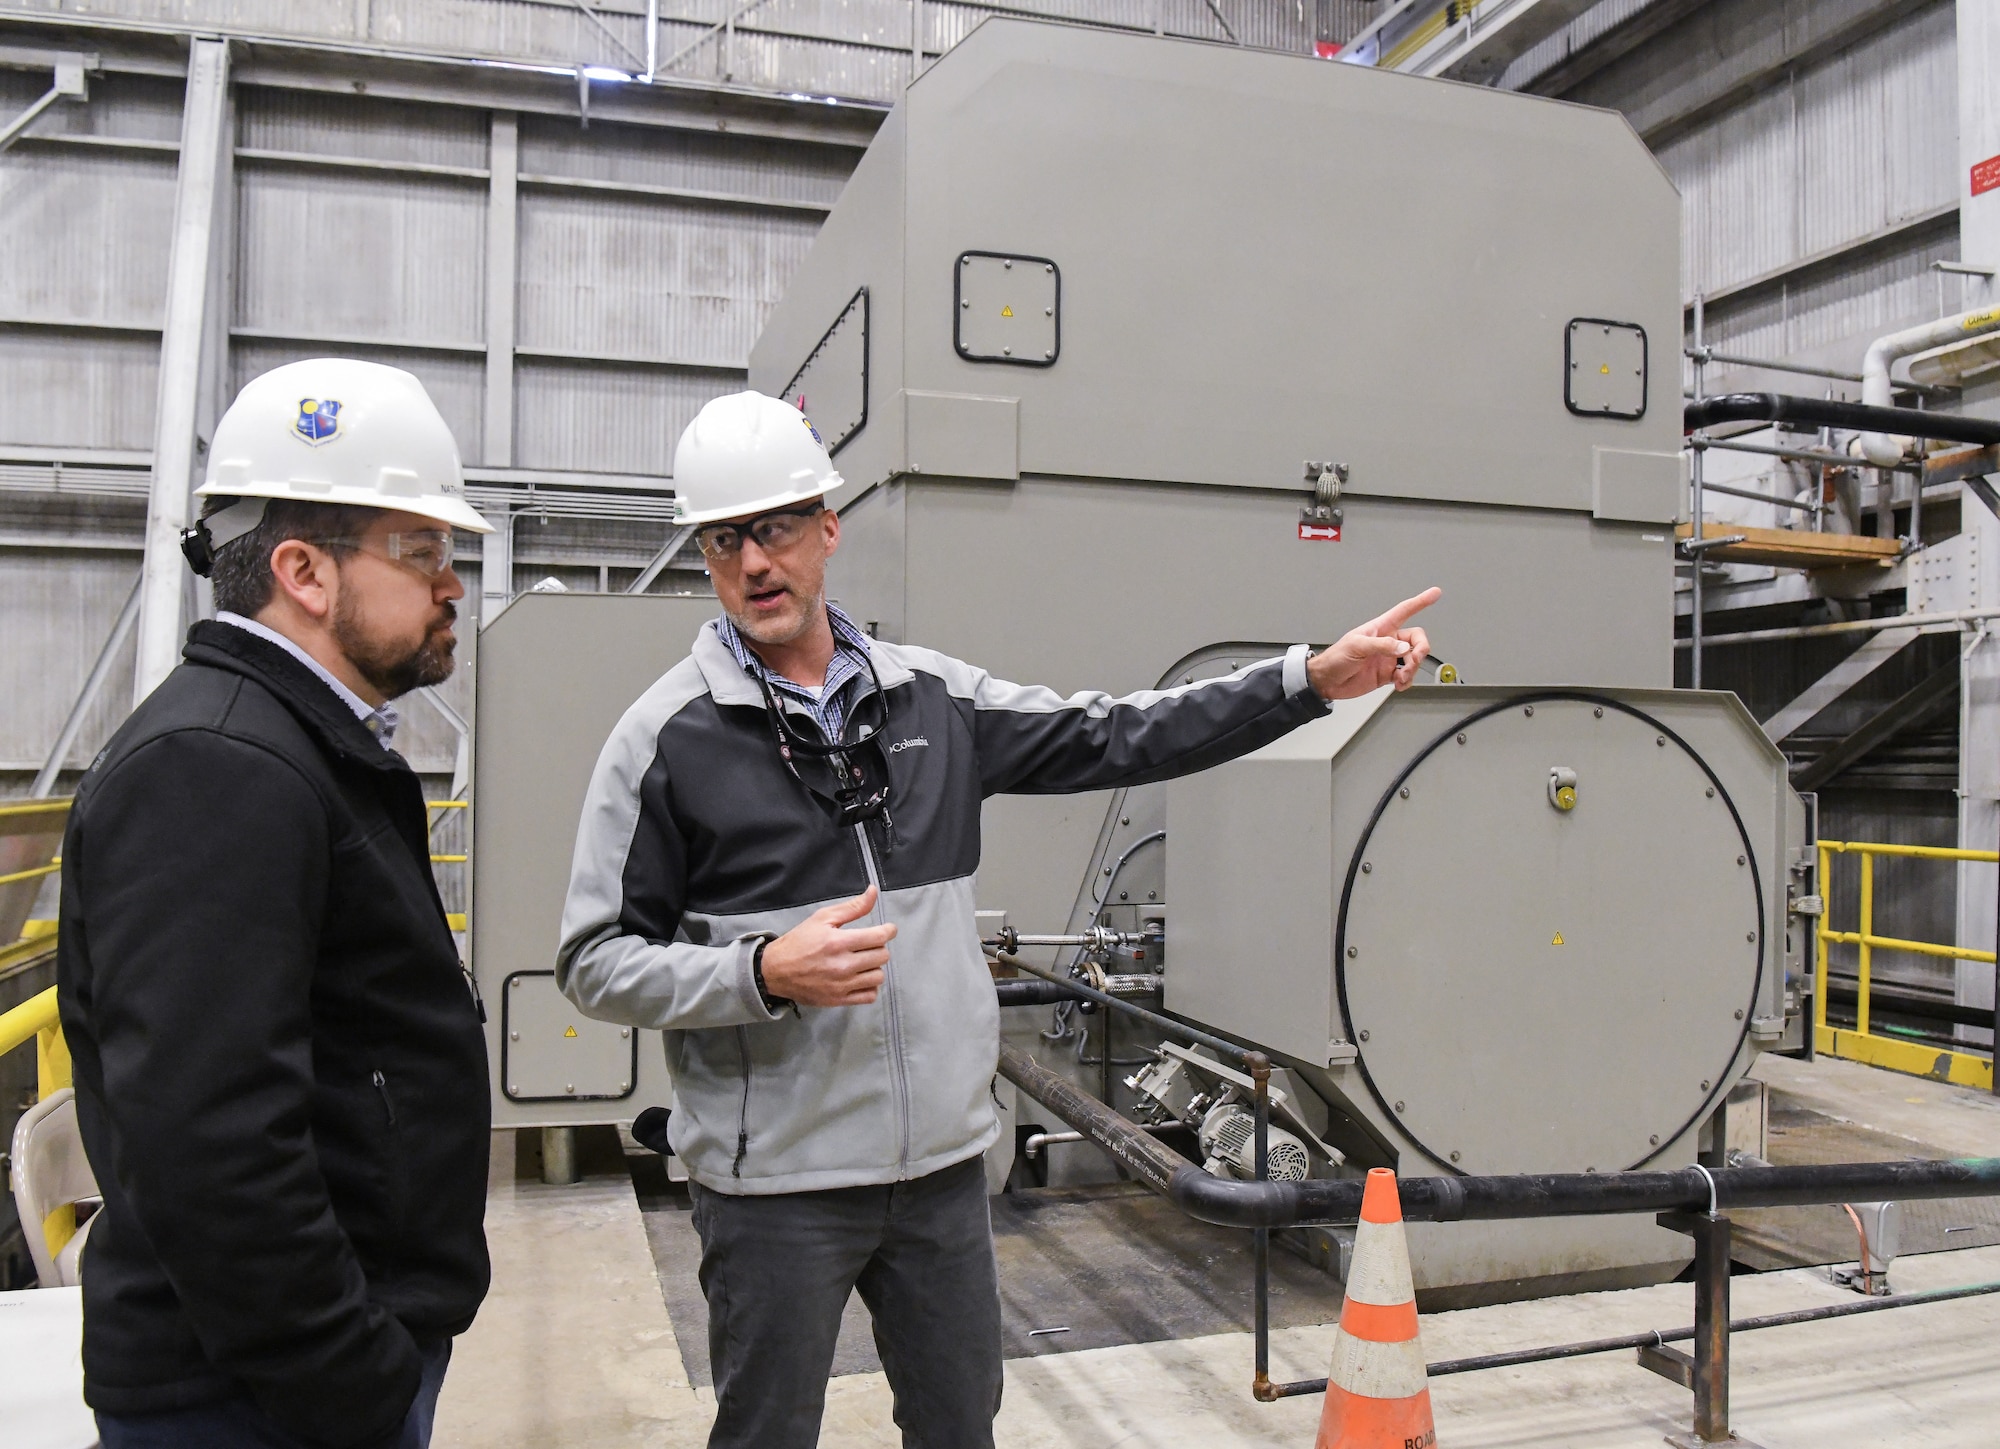 Joseph Baxter, right, an AEDC project manager, talks about A Plant Exhauster Motors improvements being completed under the Service Life Extension Program (SLEP), seen here Feb. 13, 2020, at Arnold Air Force Base, Tenn. Also pictured, Nathan Harrison, former SLEP manager for the Capital Improvements Branch. (U.S. Air Force photo by Jill Pickett)